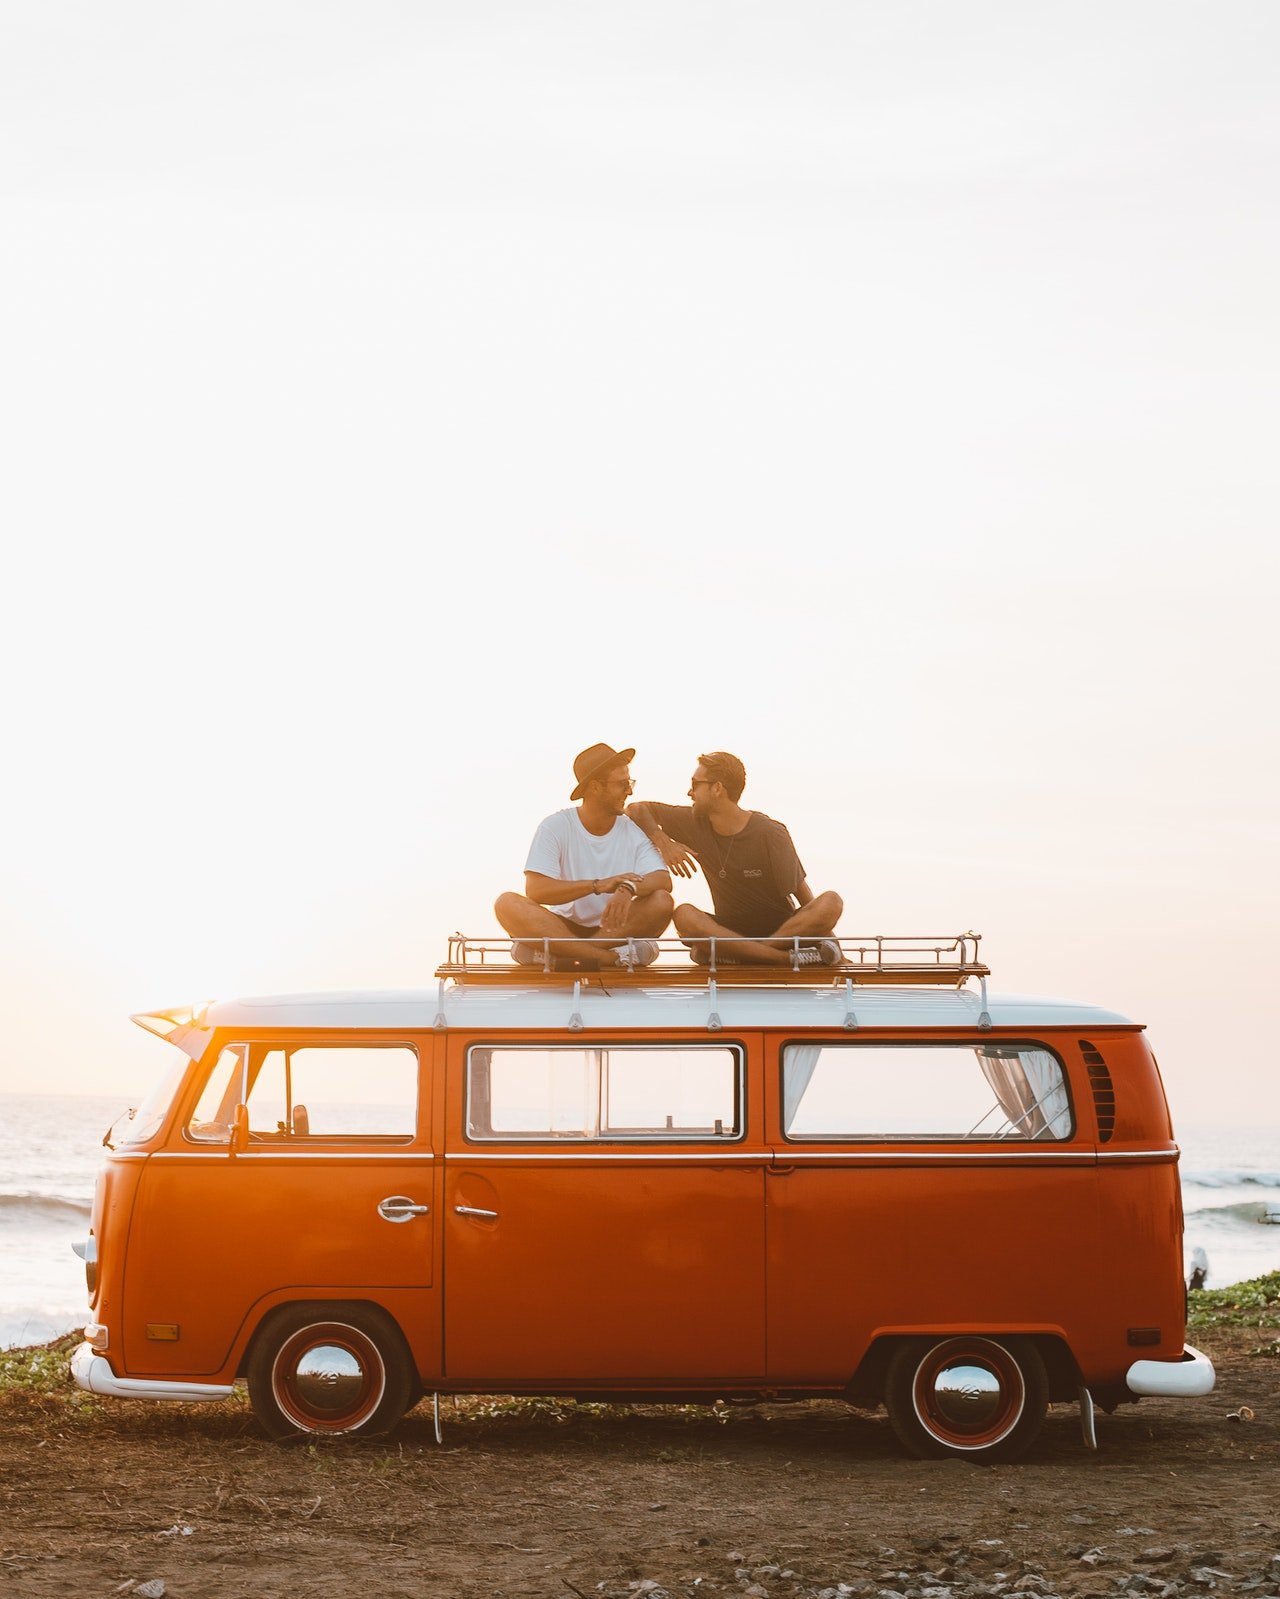 Photo of two men on a camp bus| Photo: Pexels